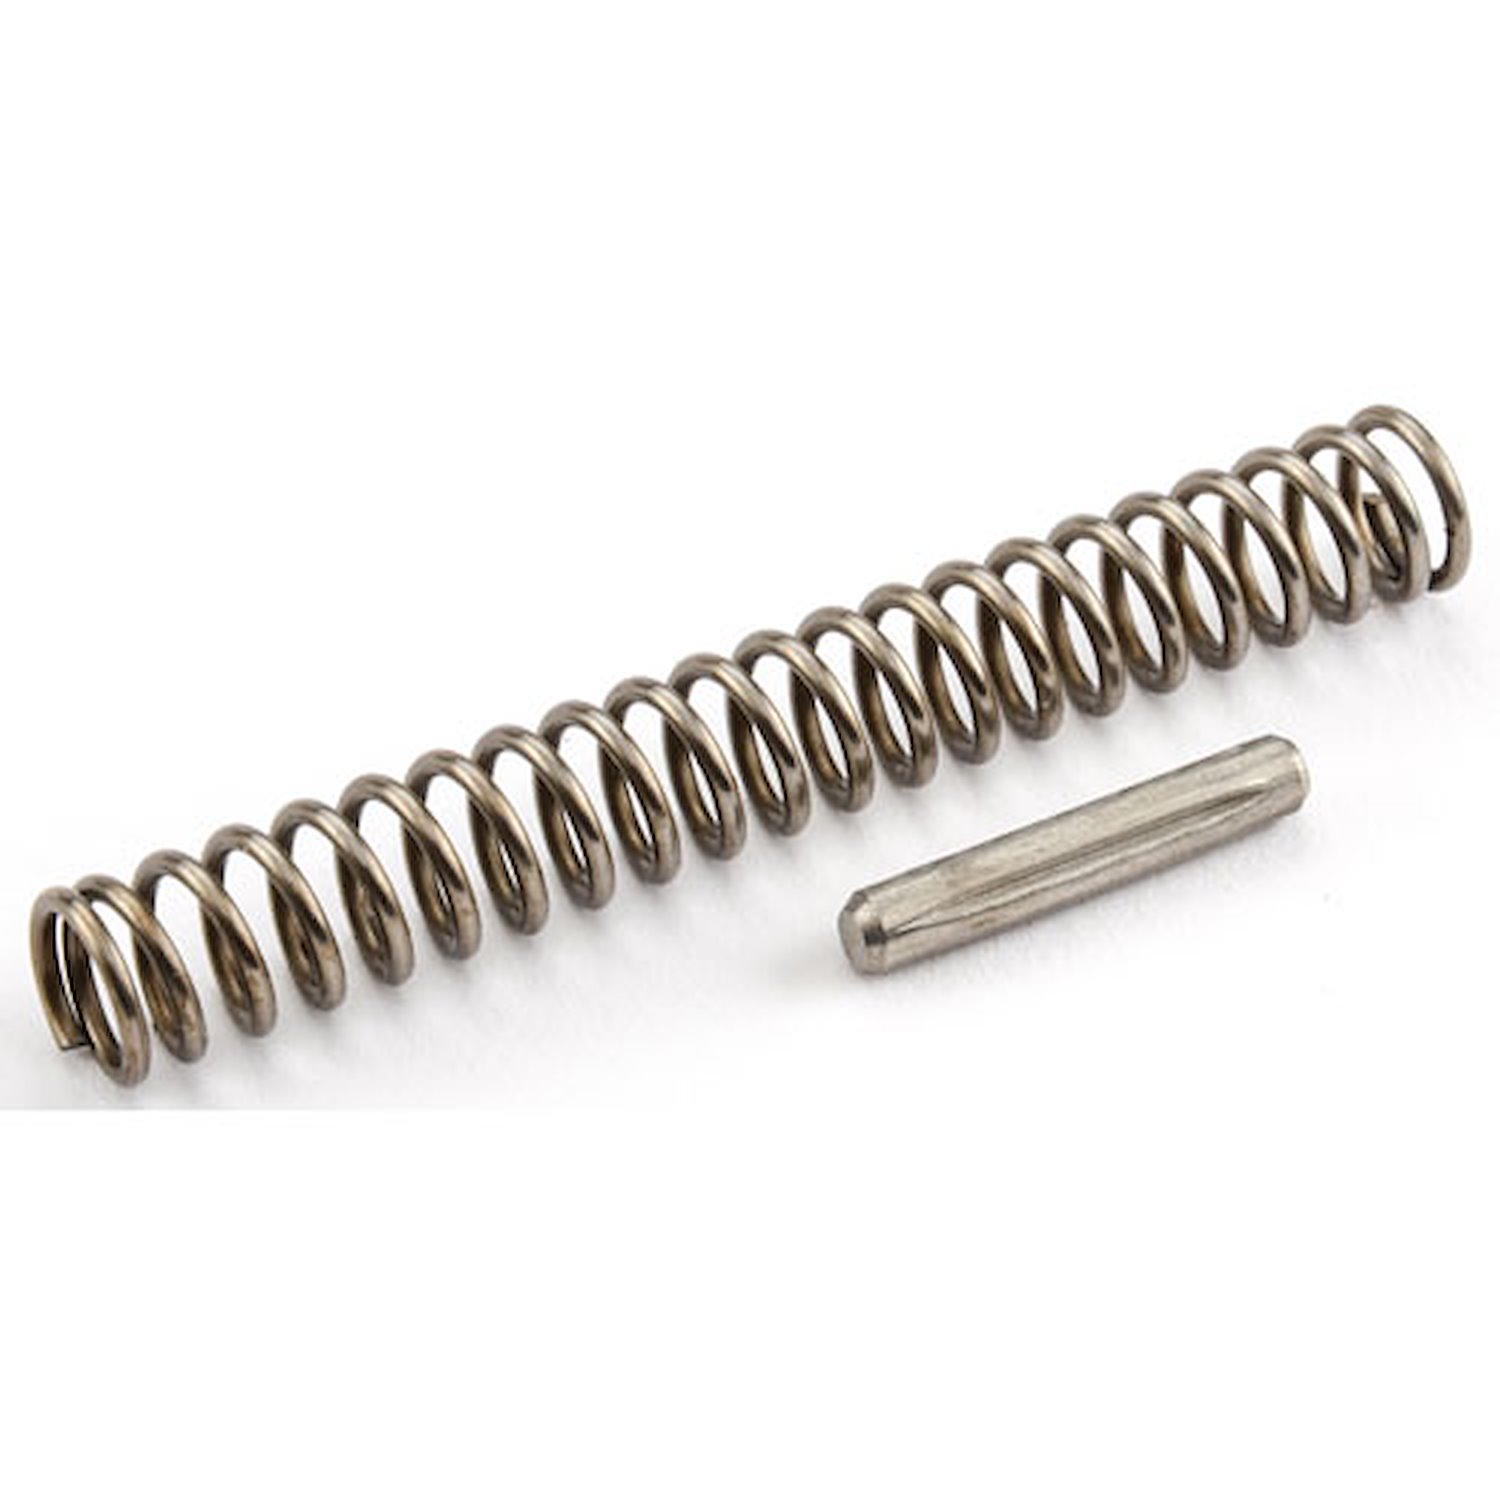 JEGS Oil Pump High Pressure Spring Fits Small Block Chevy (except LT1, LT4, LS1, and LS6)